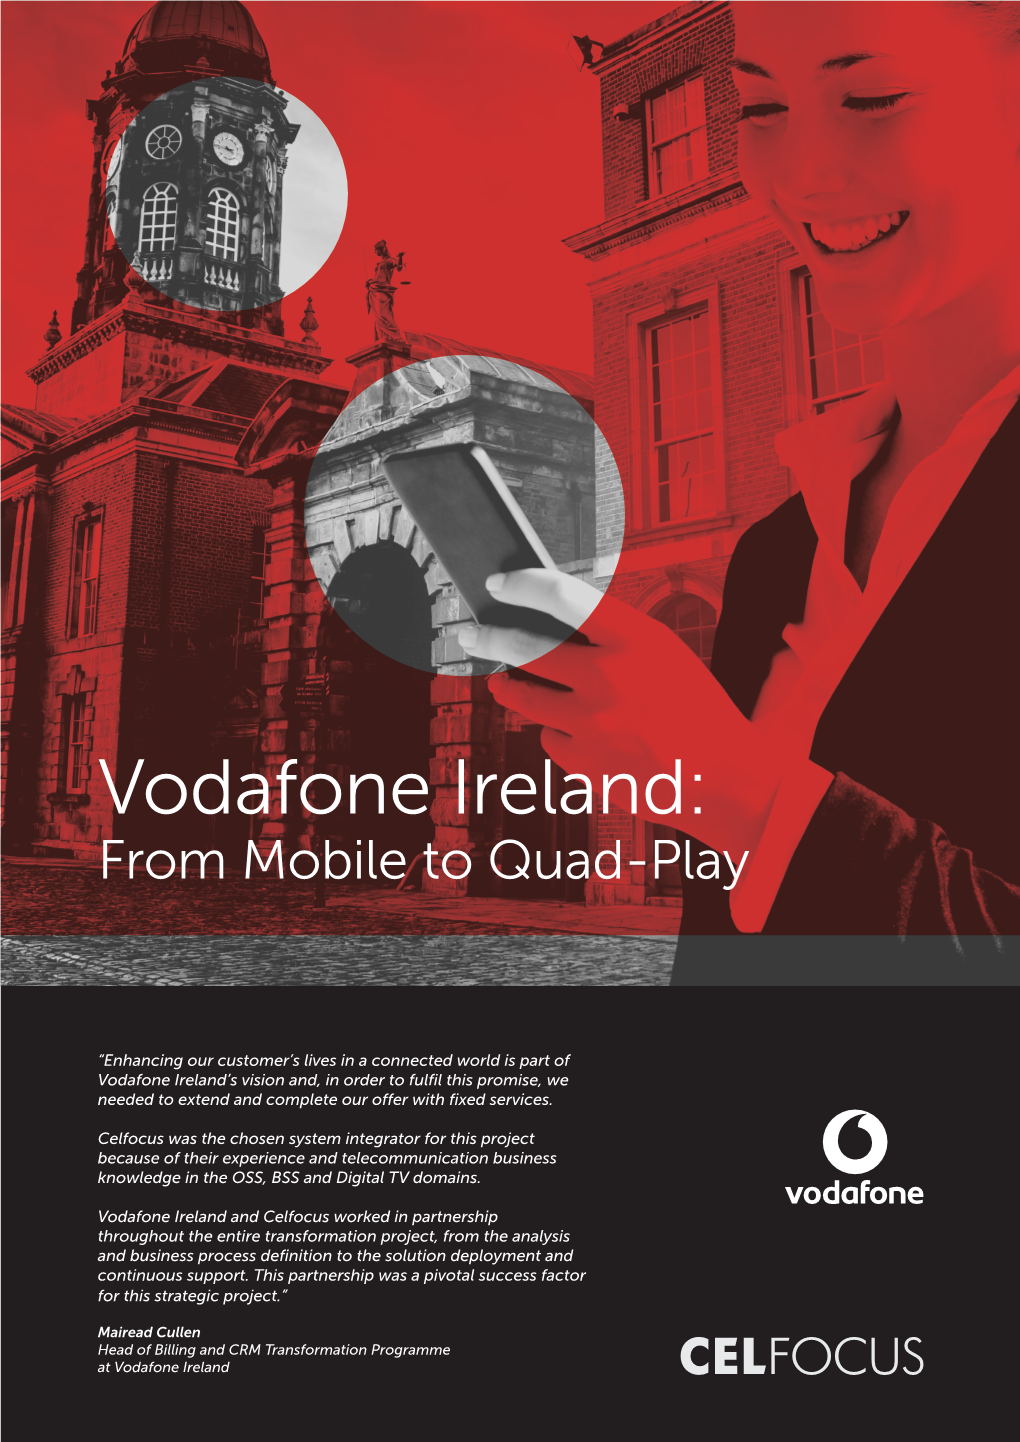 Vodafone Ireland: from Mobile to Quad-Play